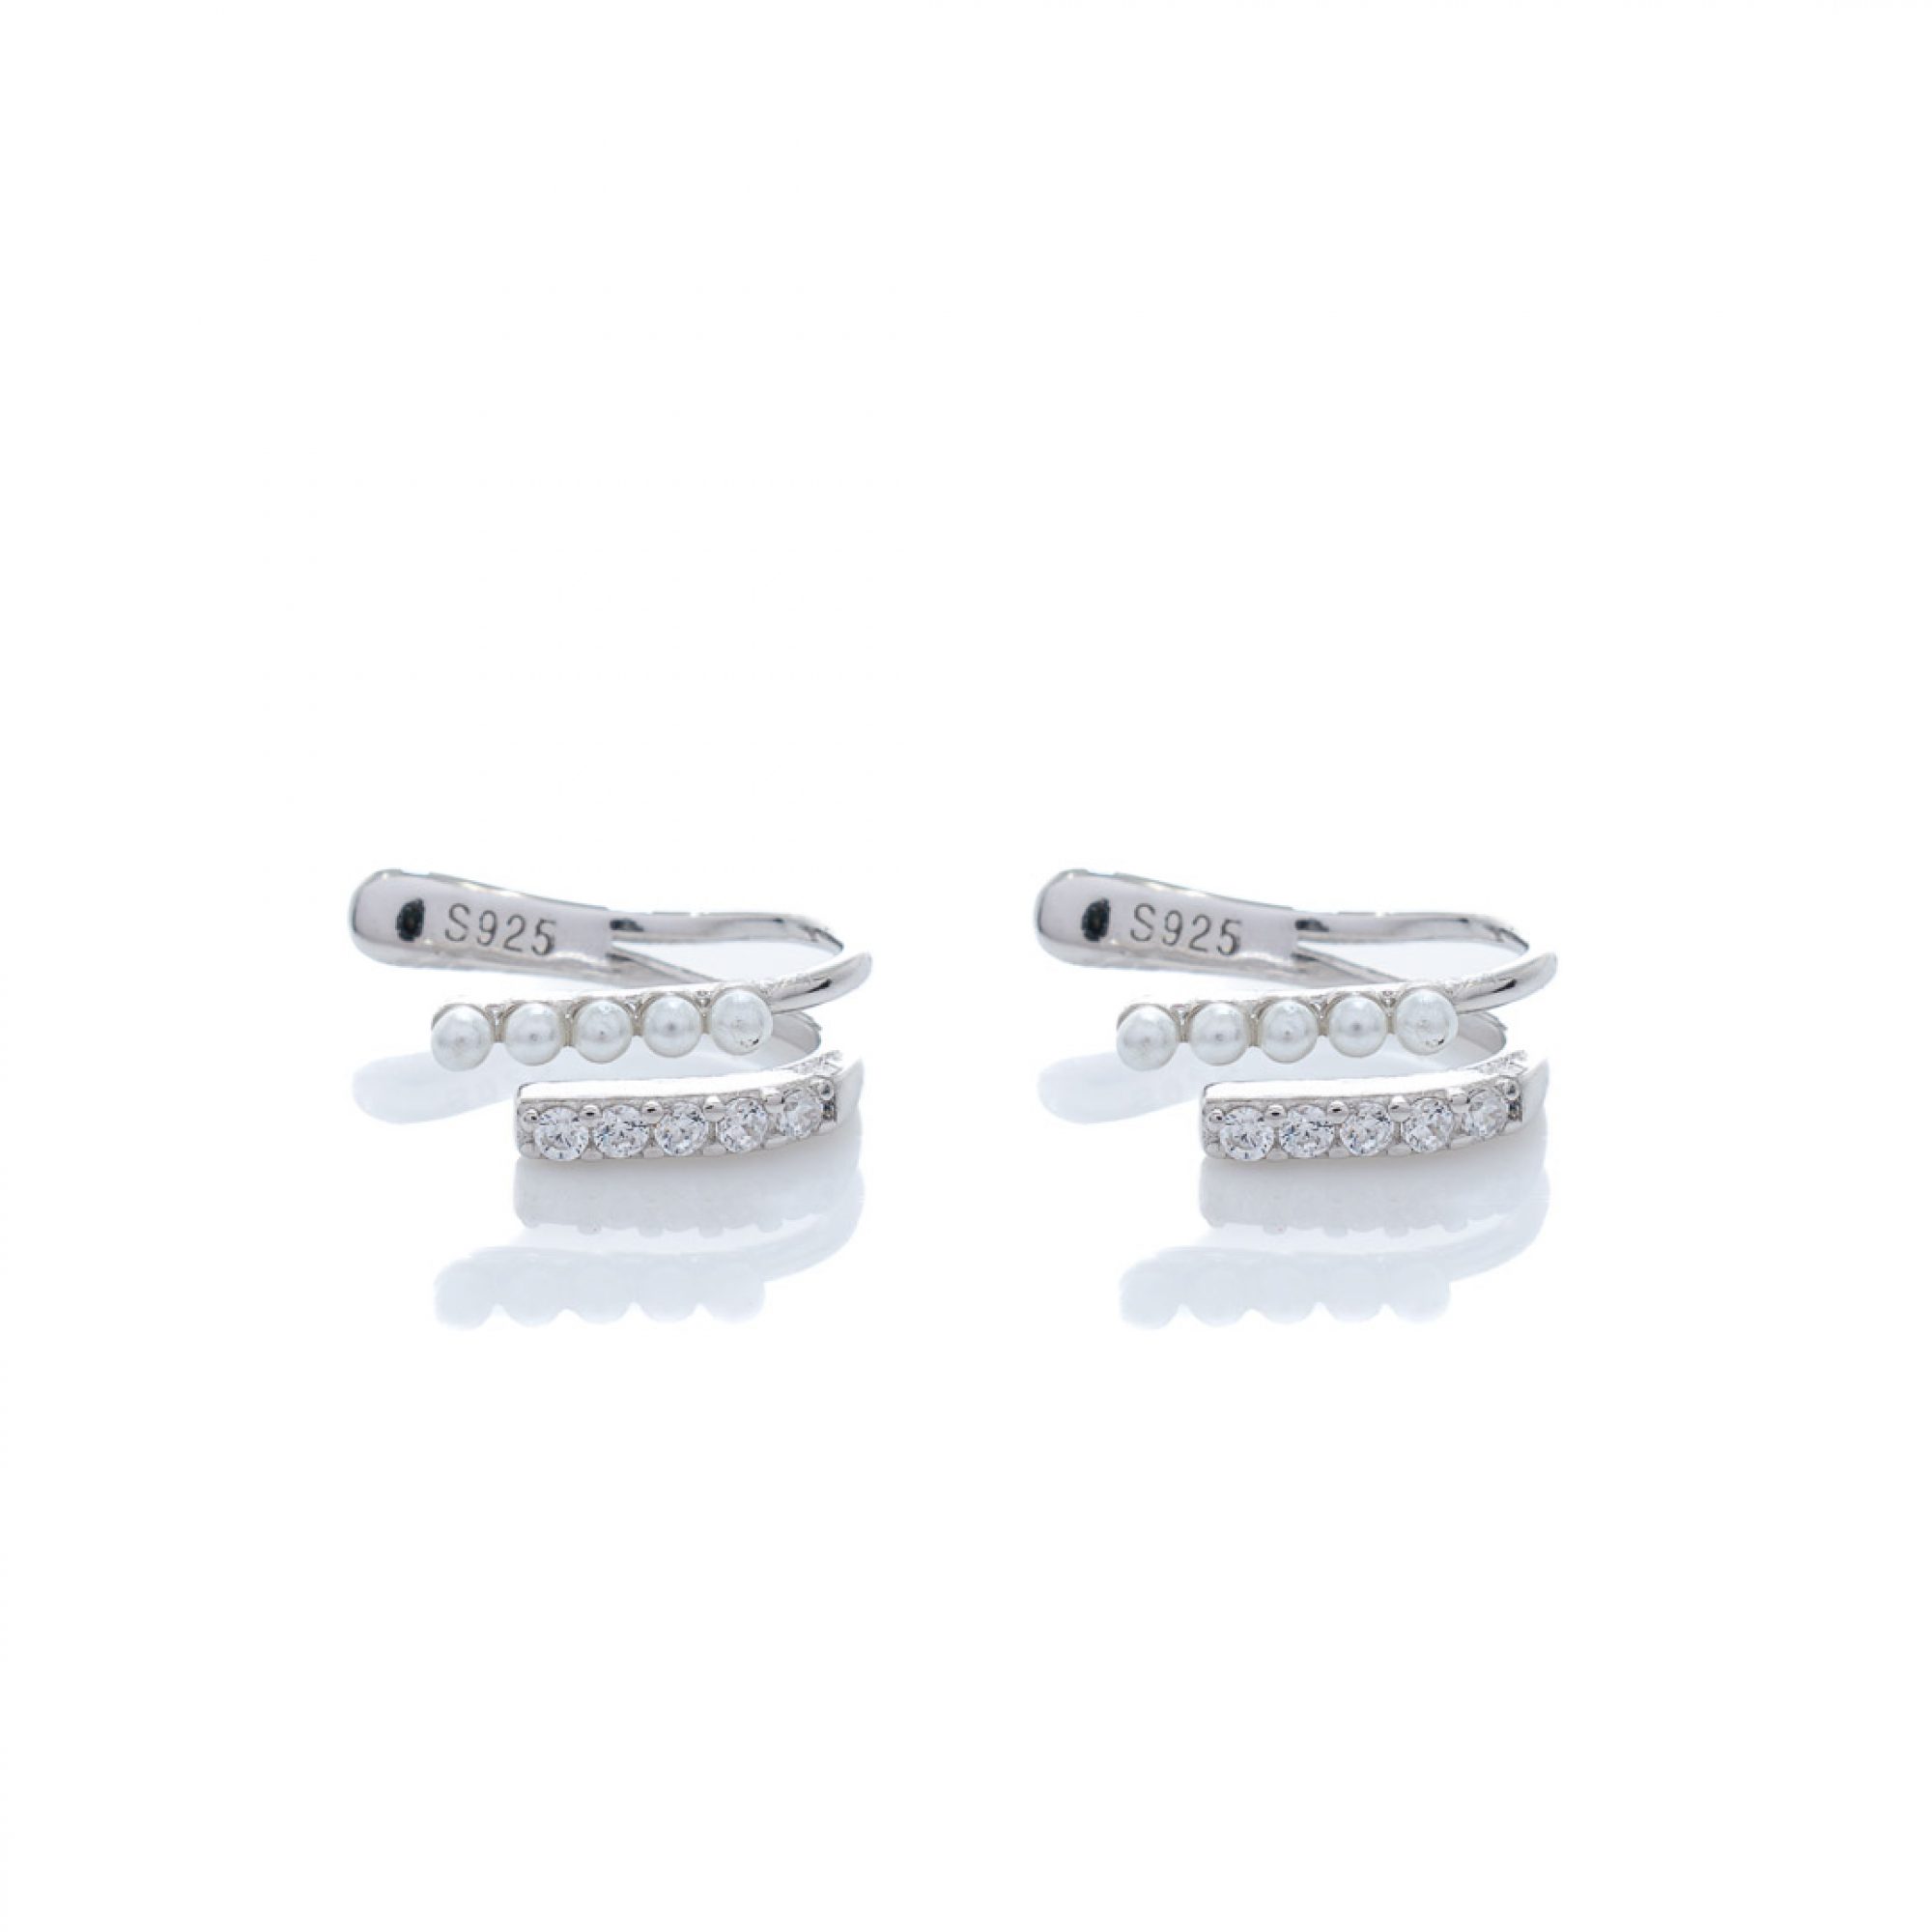 Silver ear cuffs with real pearls and zircon stones